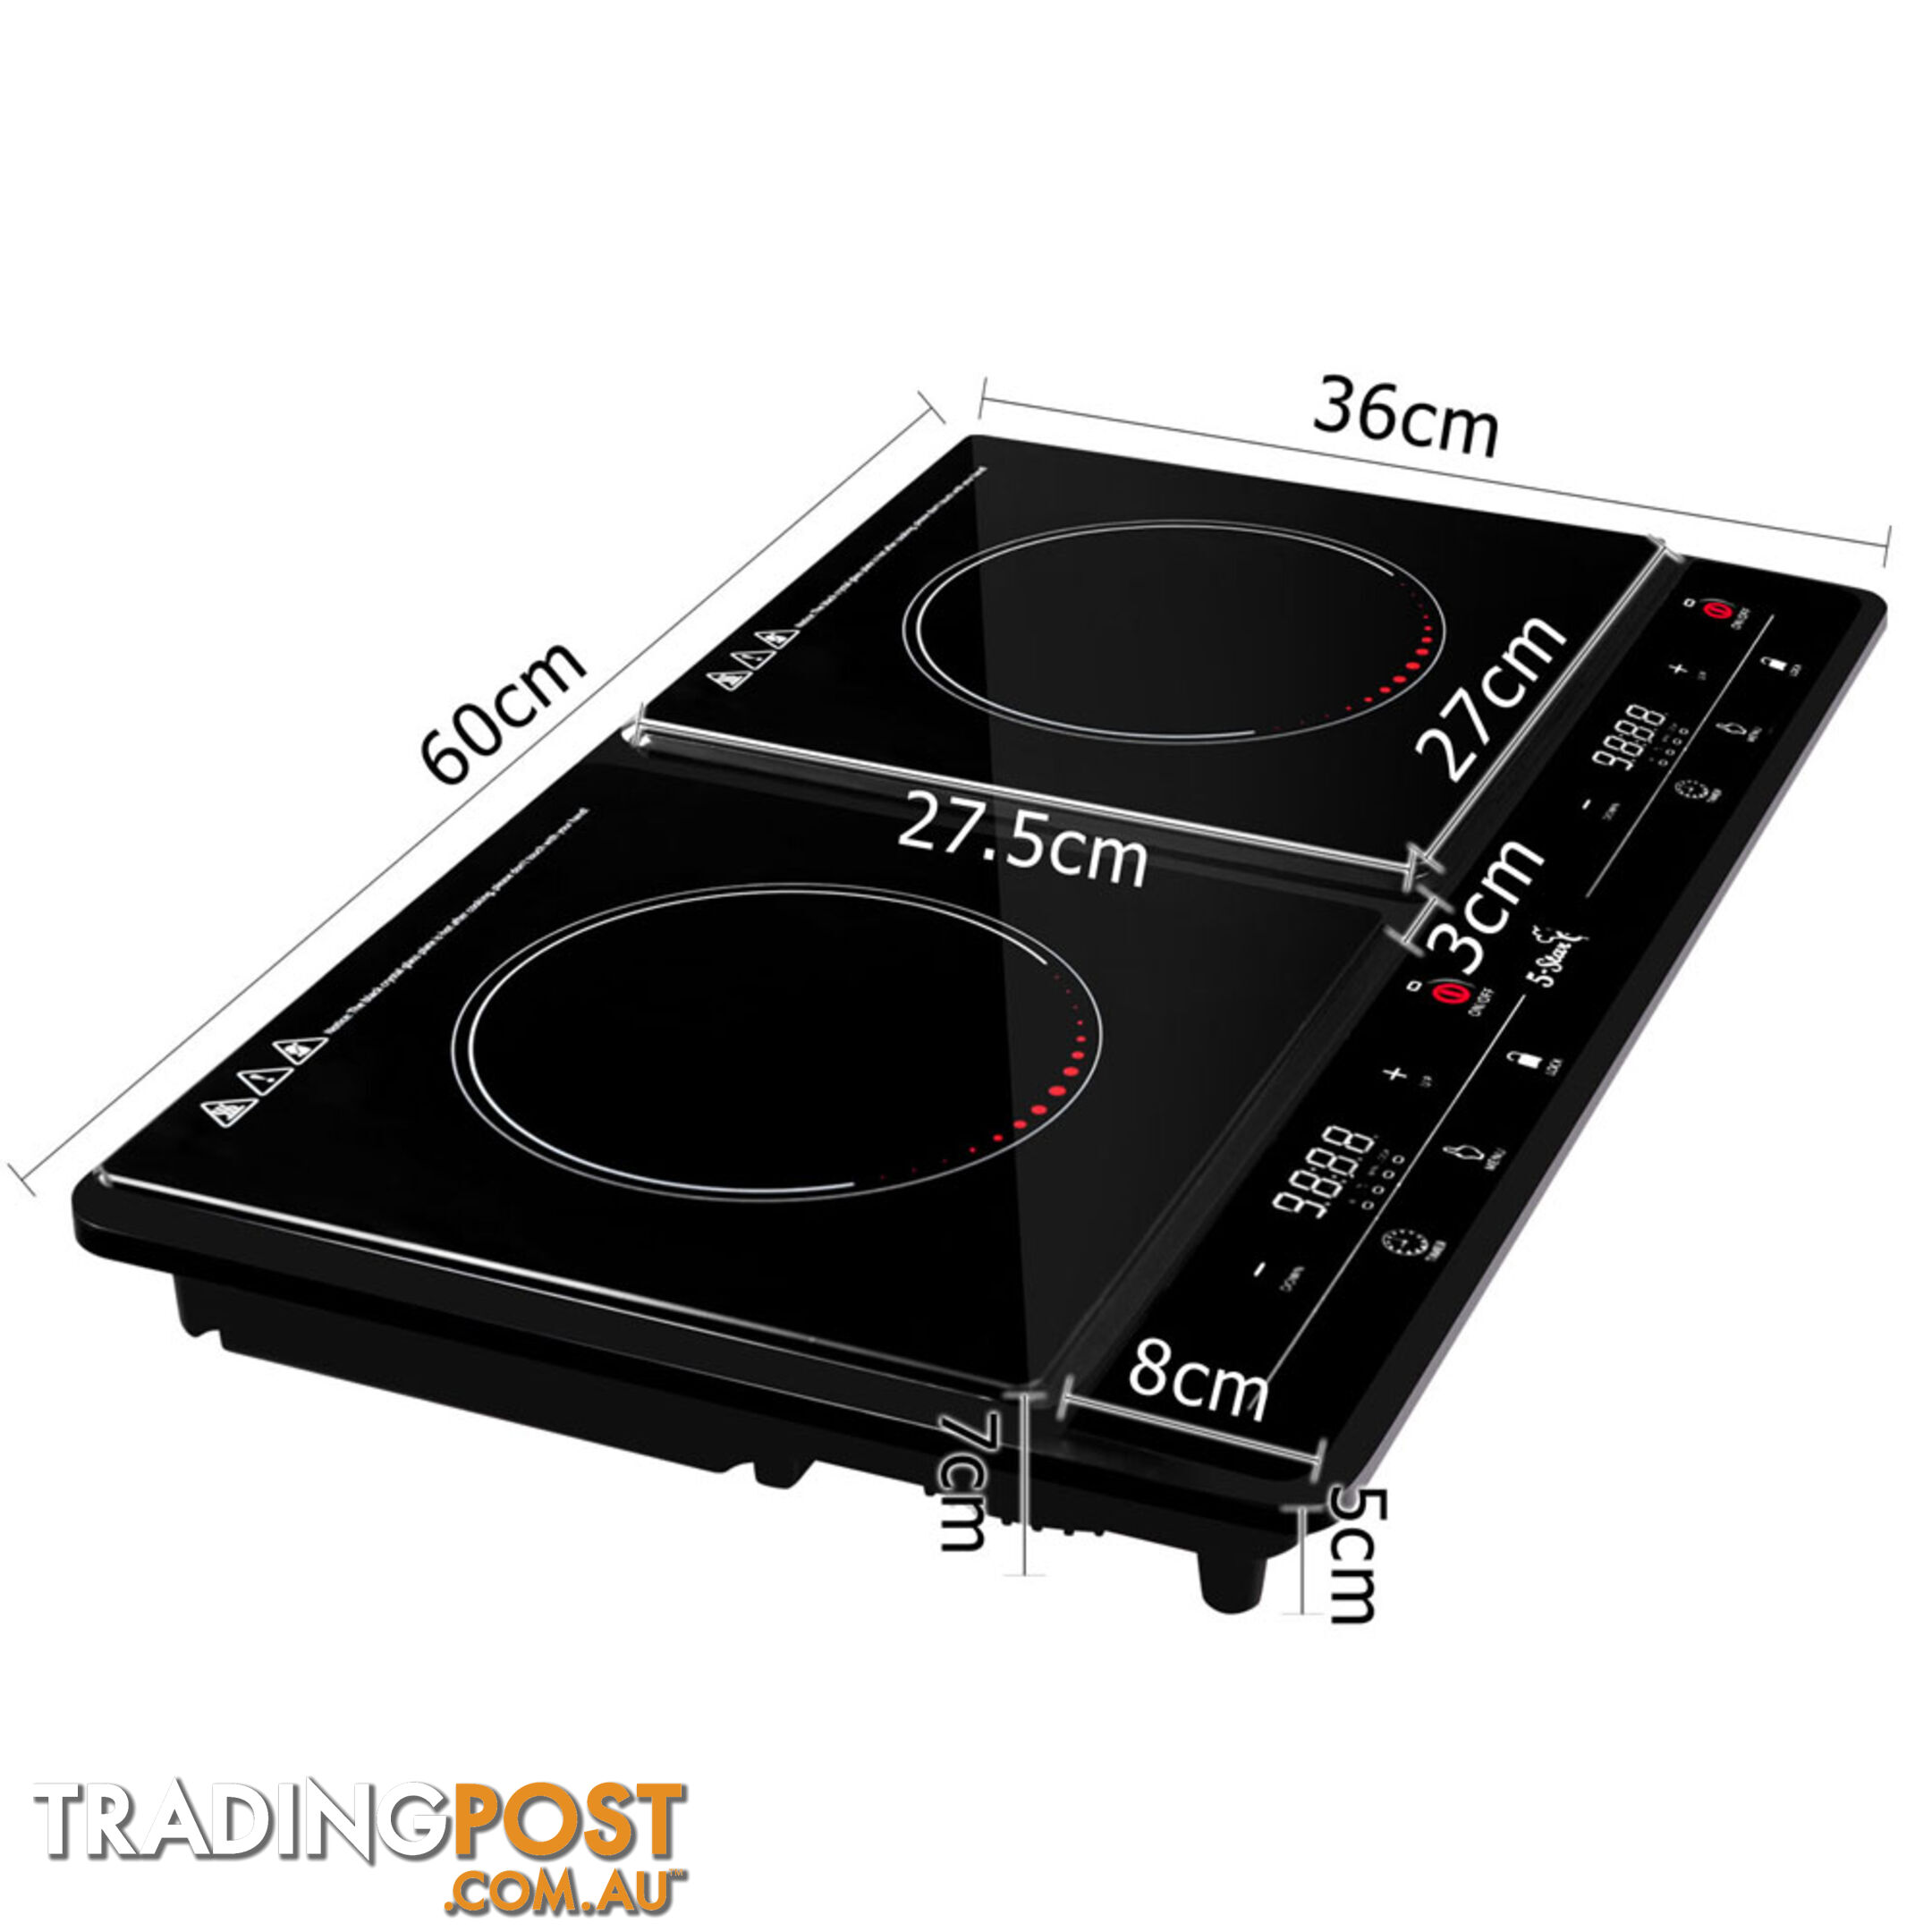 Portable Electric Induction Cooktop Kitchen Stove Ceramic Hot Plate Double